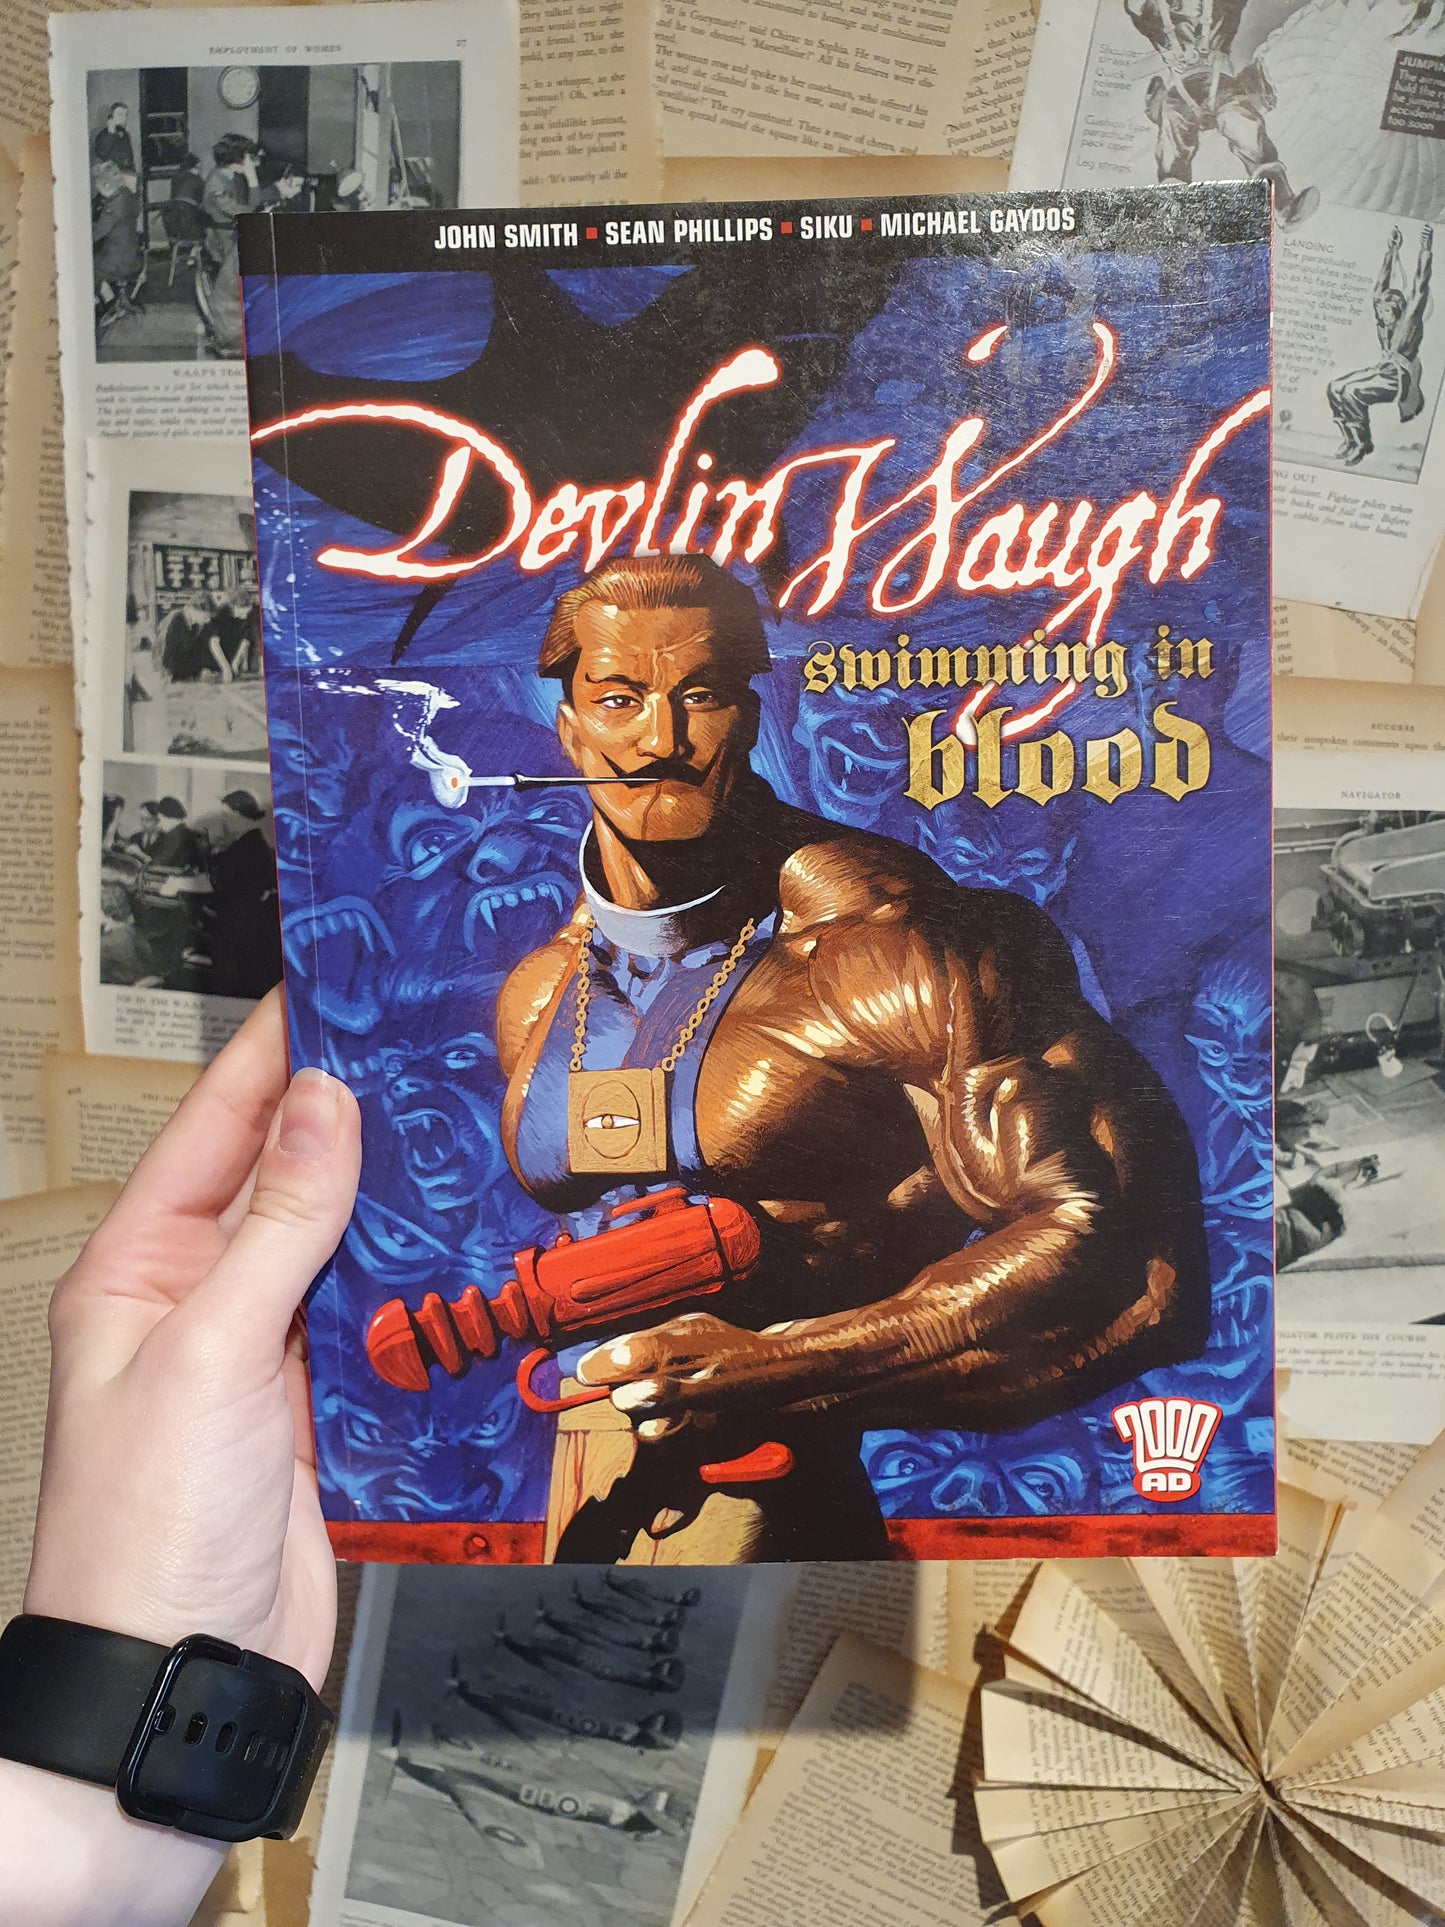 Devlin Waugh: Swimming in Blood by Smith, Philips... (2004)